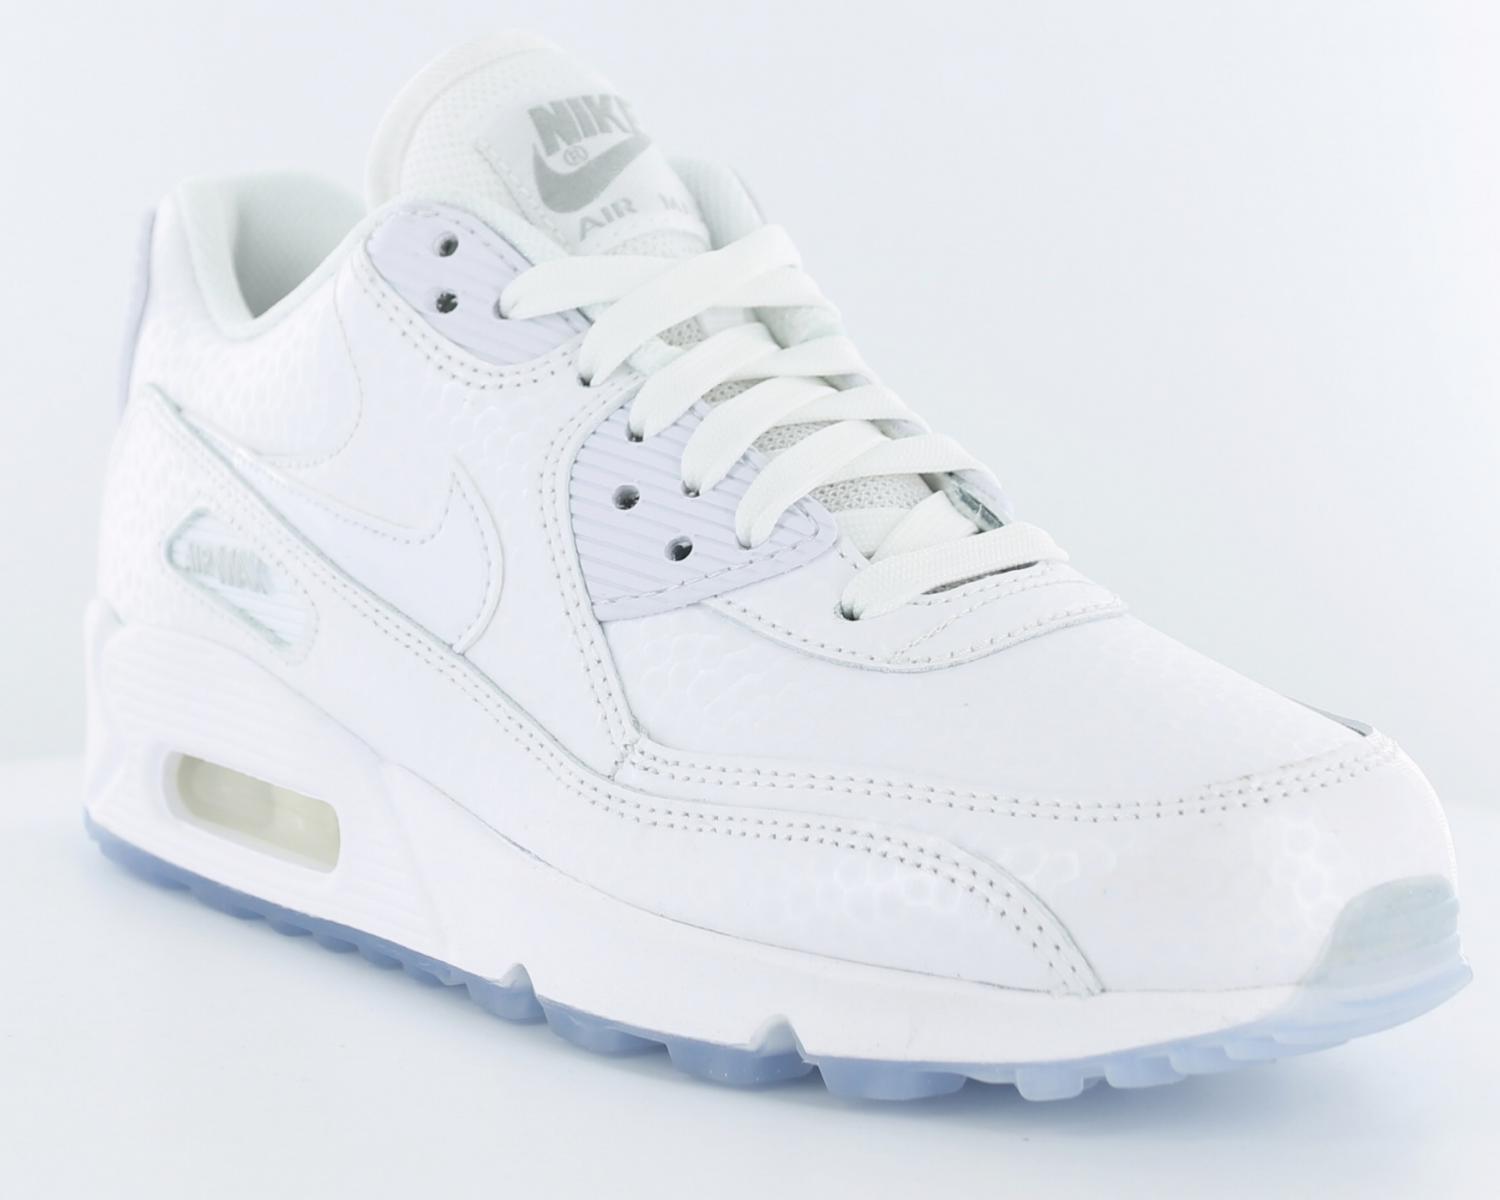 Parity > nike air max 90 blanche femme, Up to 76% OFF